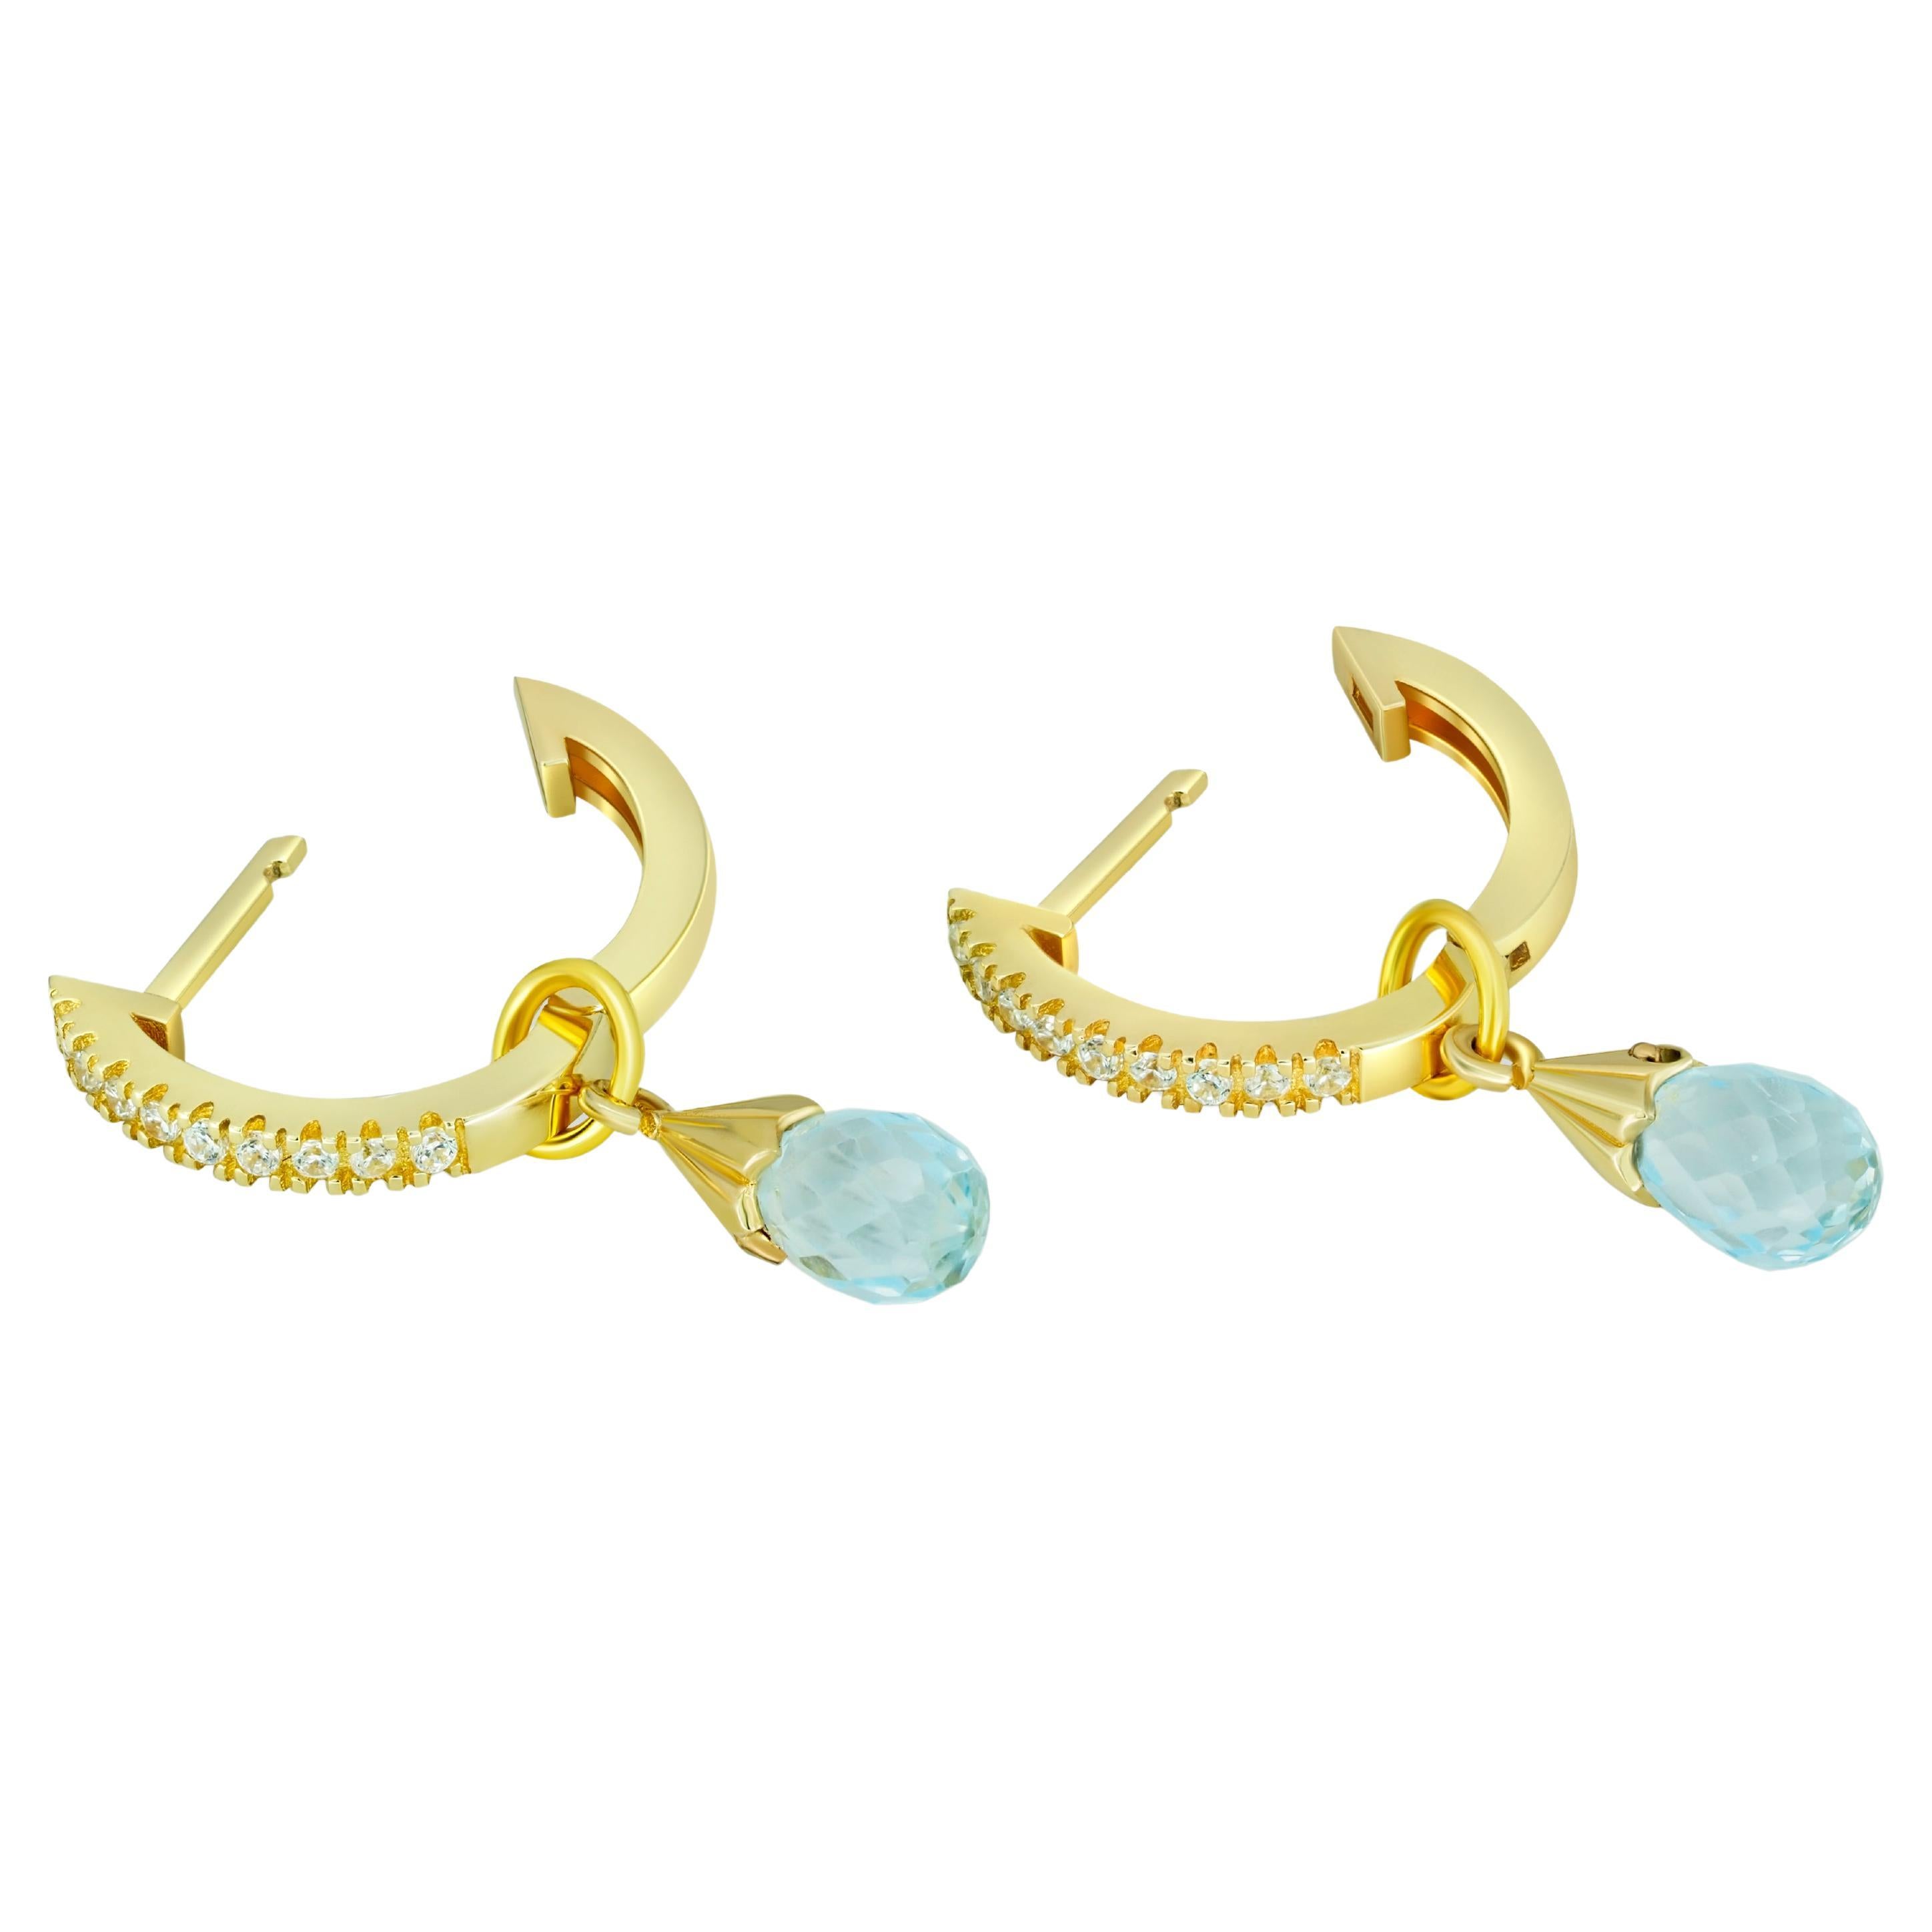 Diamond Hoop Earrings and Topaz Briolette Charms in 14k Gold.  For Sale